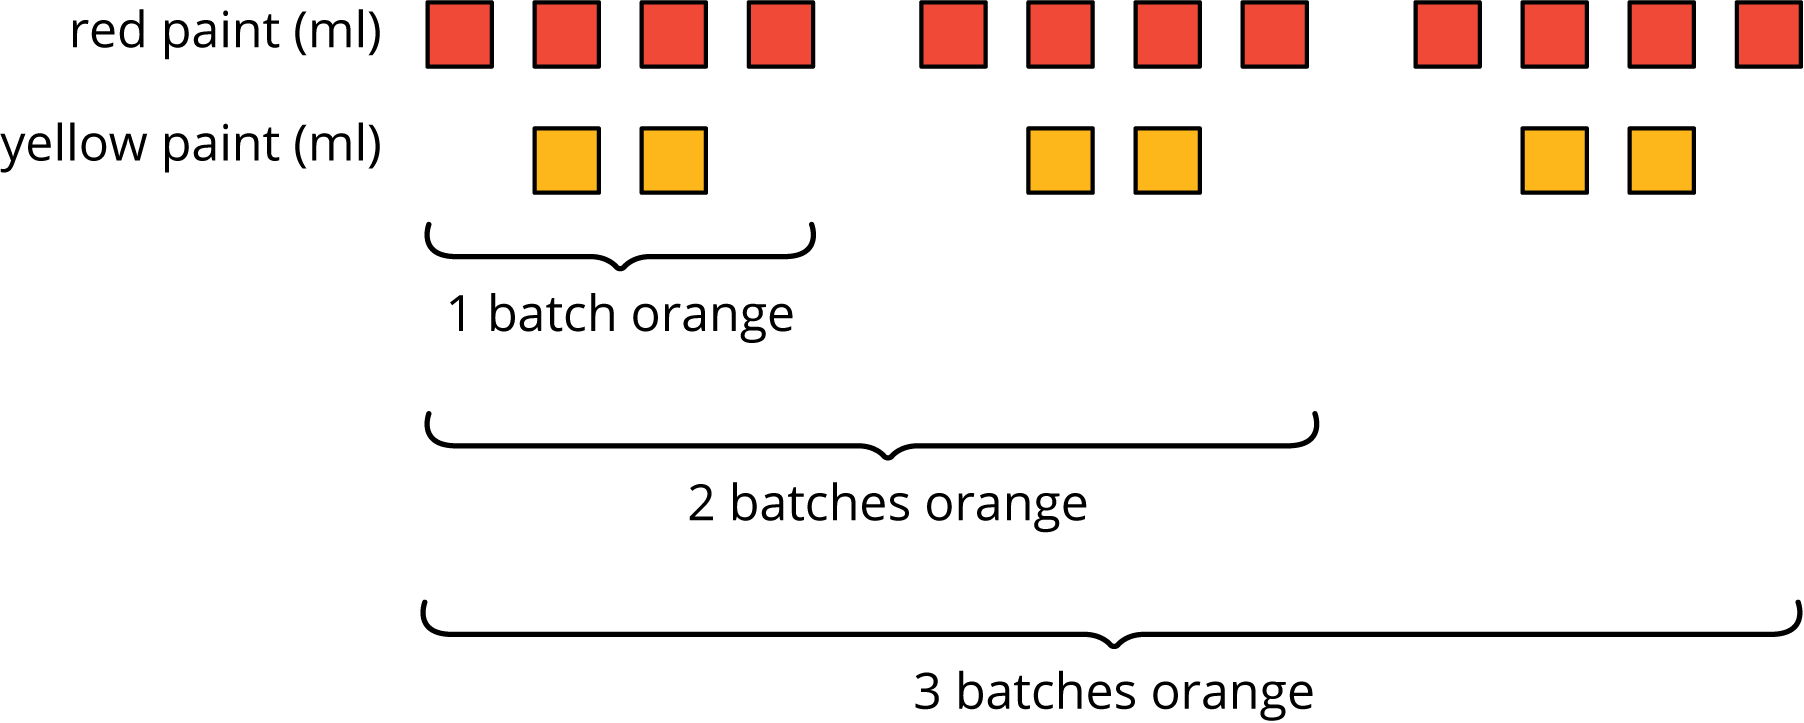 "A discrete diagram that contain red and yellow squares. The top row is labeled "red paint, in ml" and contain 12 red squares that are grouped by 4's. The bottom row is labeled "yellow paint, in ml" and contain 6 yellow squares grouped by 2's.  There is a brace that contains 4 red squares and 2 yellow squares labeled "1 batch orange." A second brace contains 8 red squares and 4 yellow squares labeled "2 batches orange." A third brace contains 12 red squares and 6 yellow squares labeled "3 batches orange."